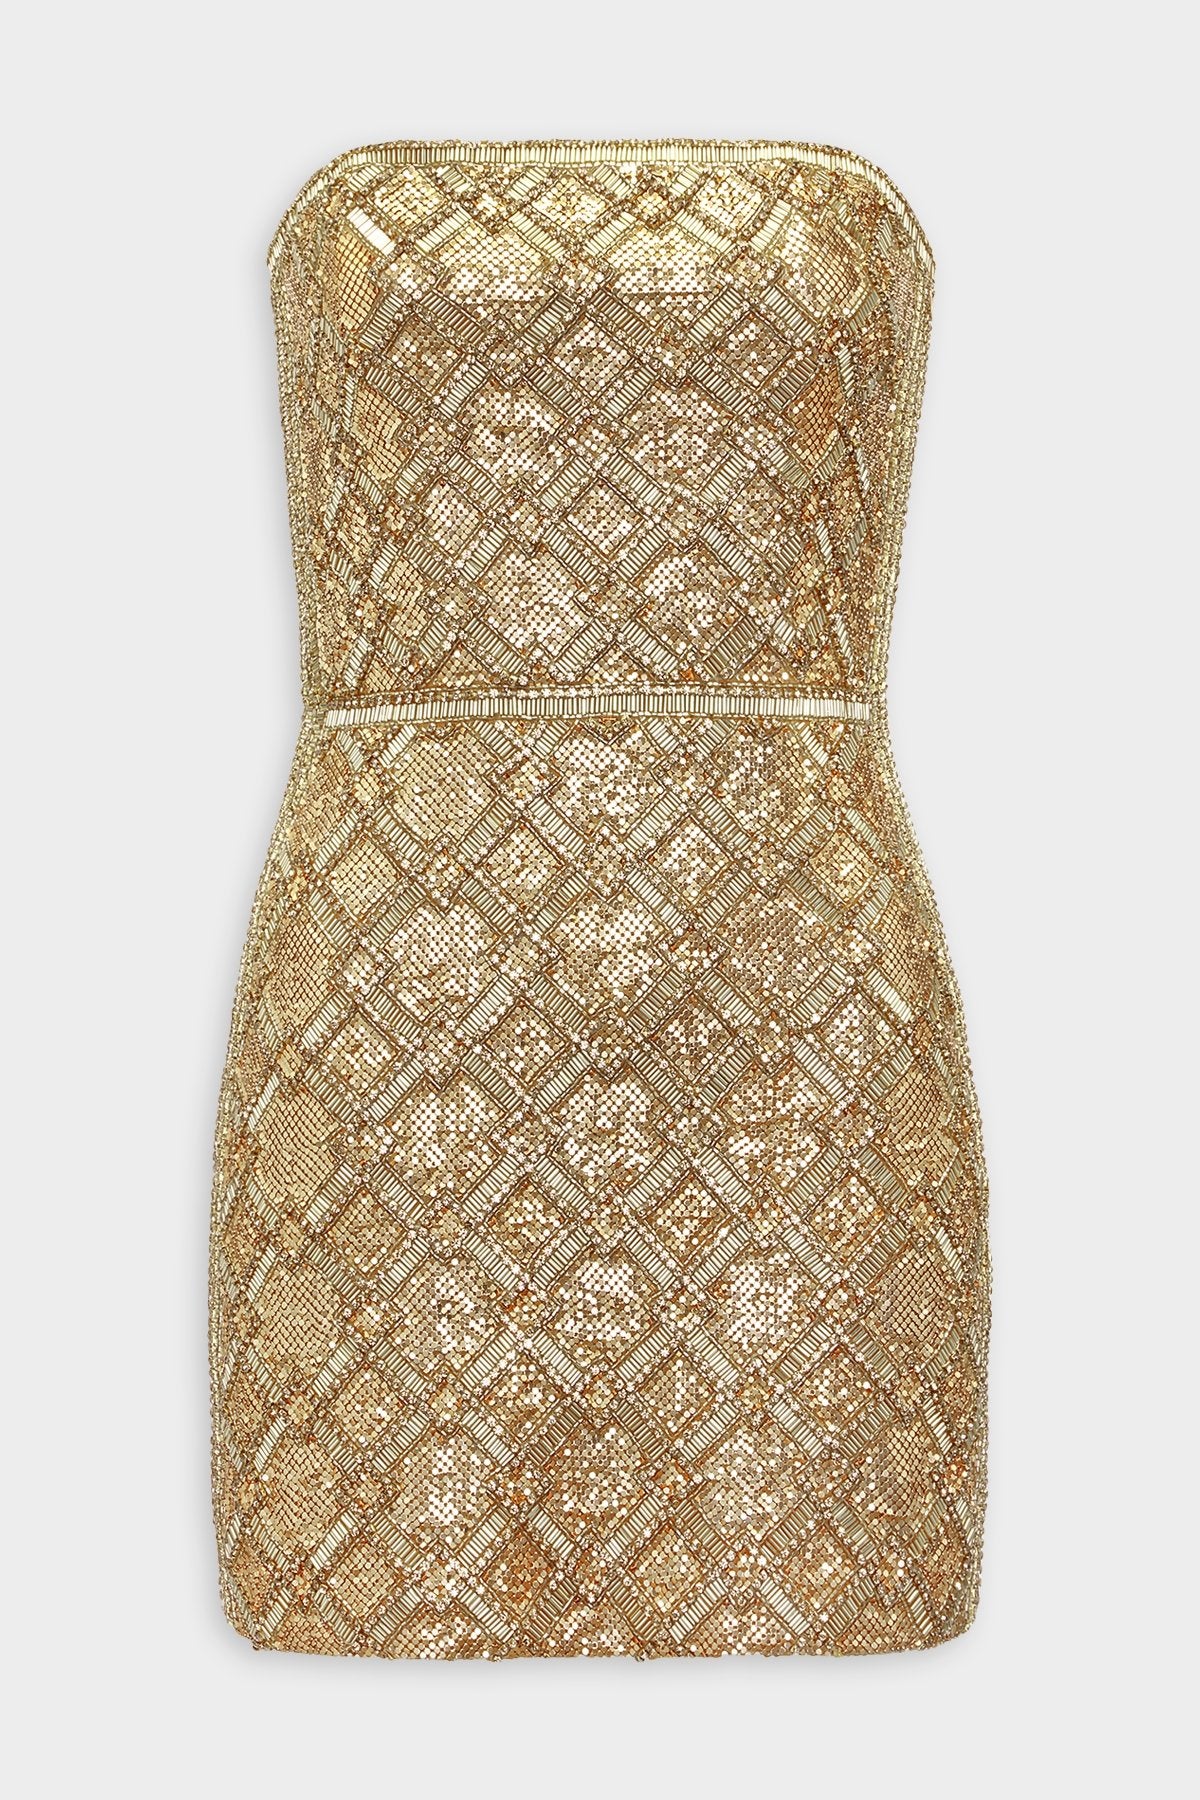 Heather Dress in Gold Chainmail - shop-olivia.com